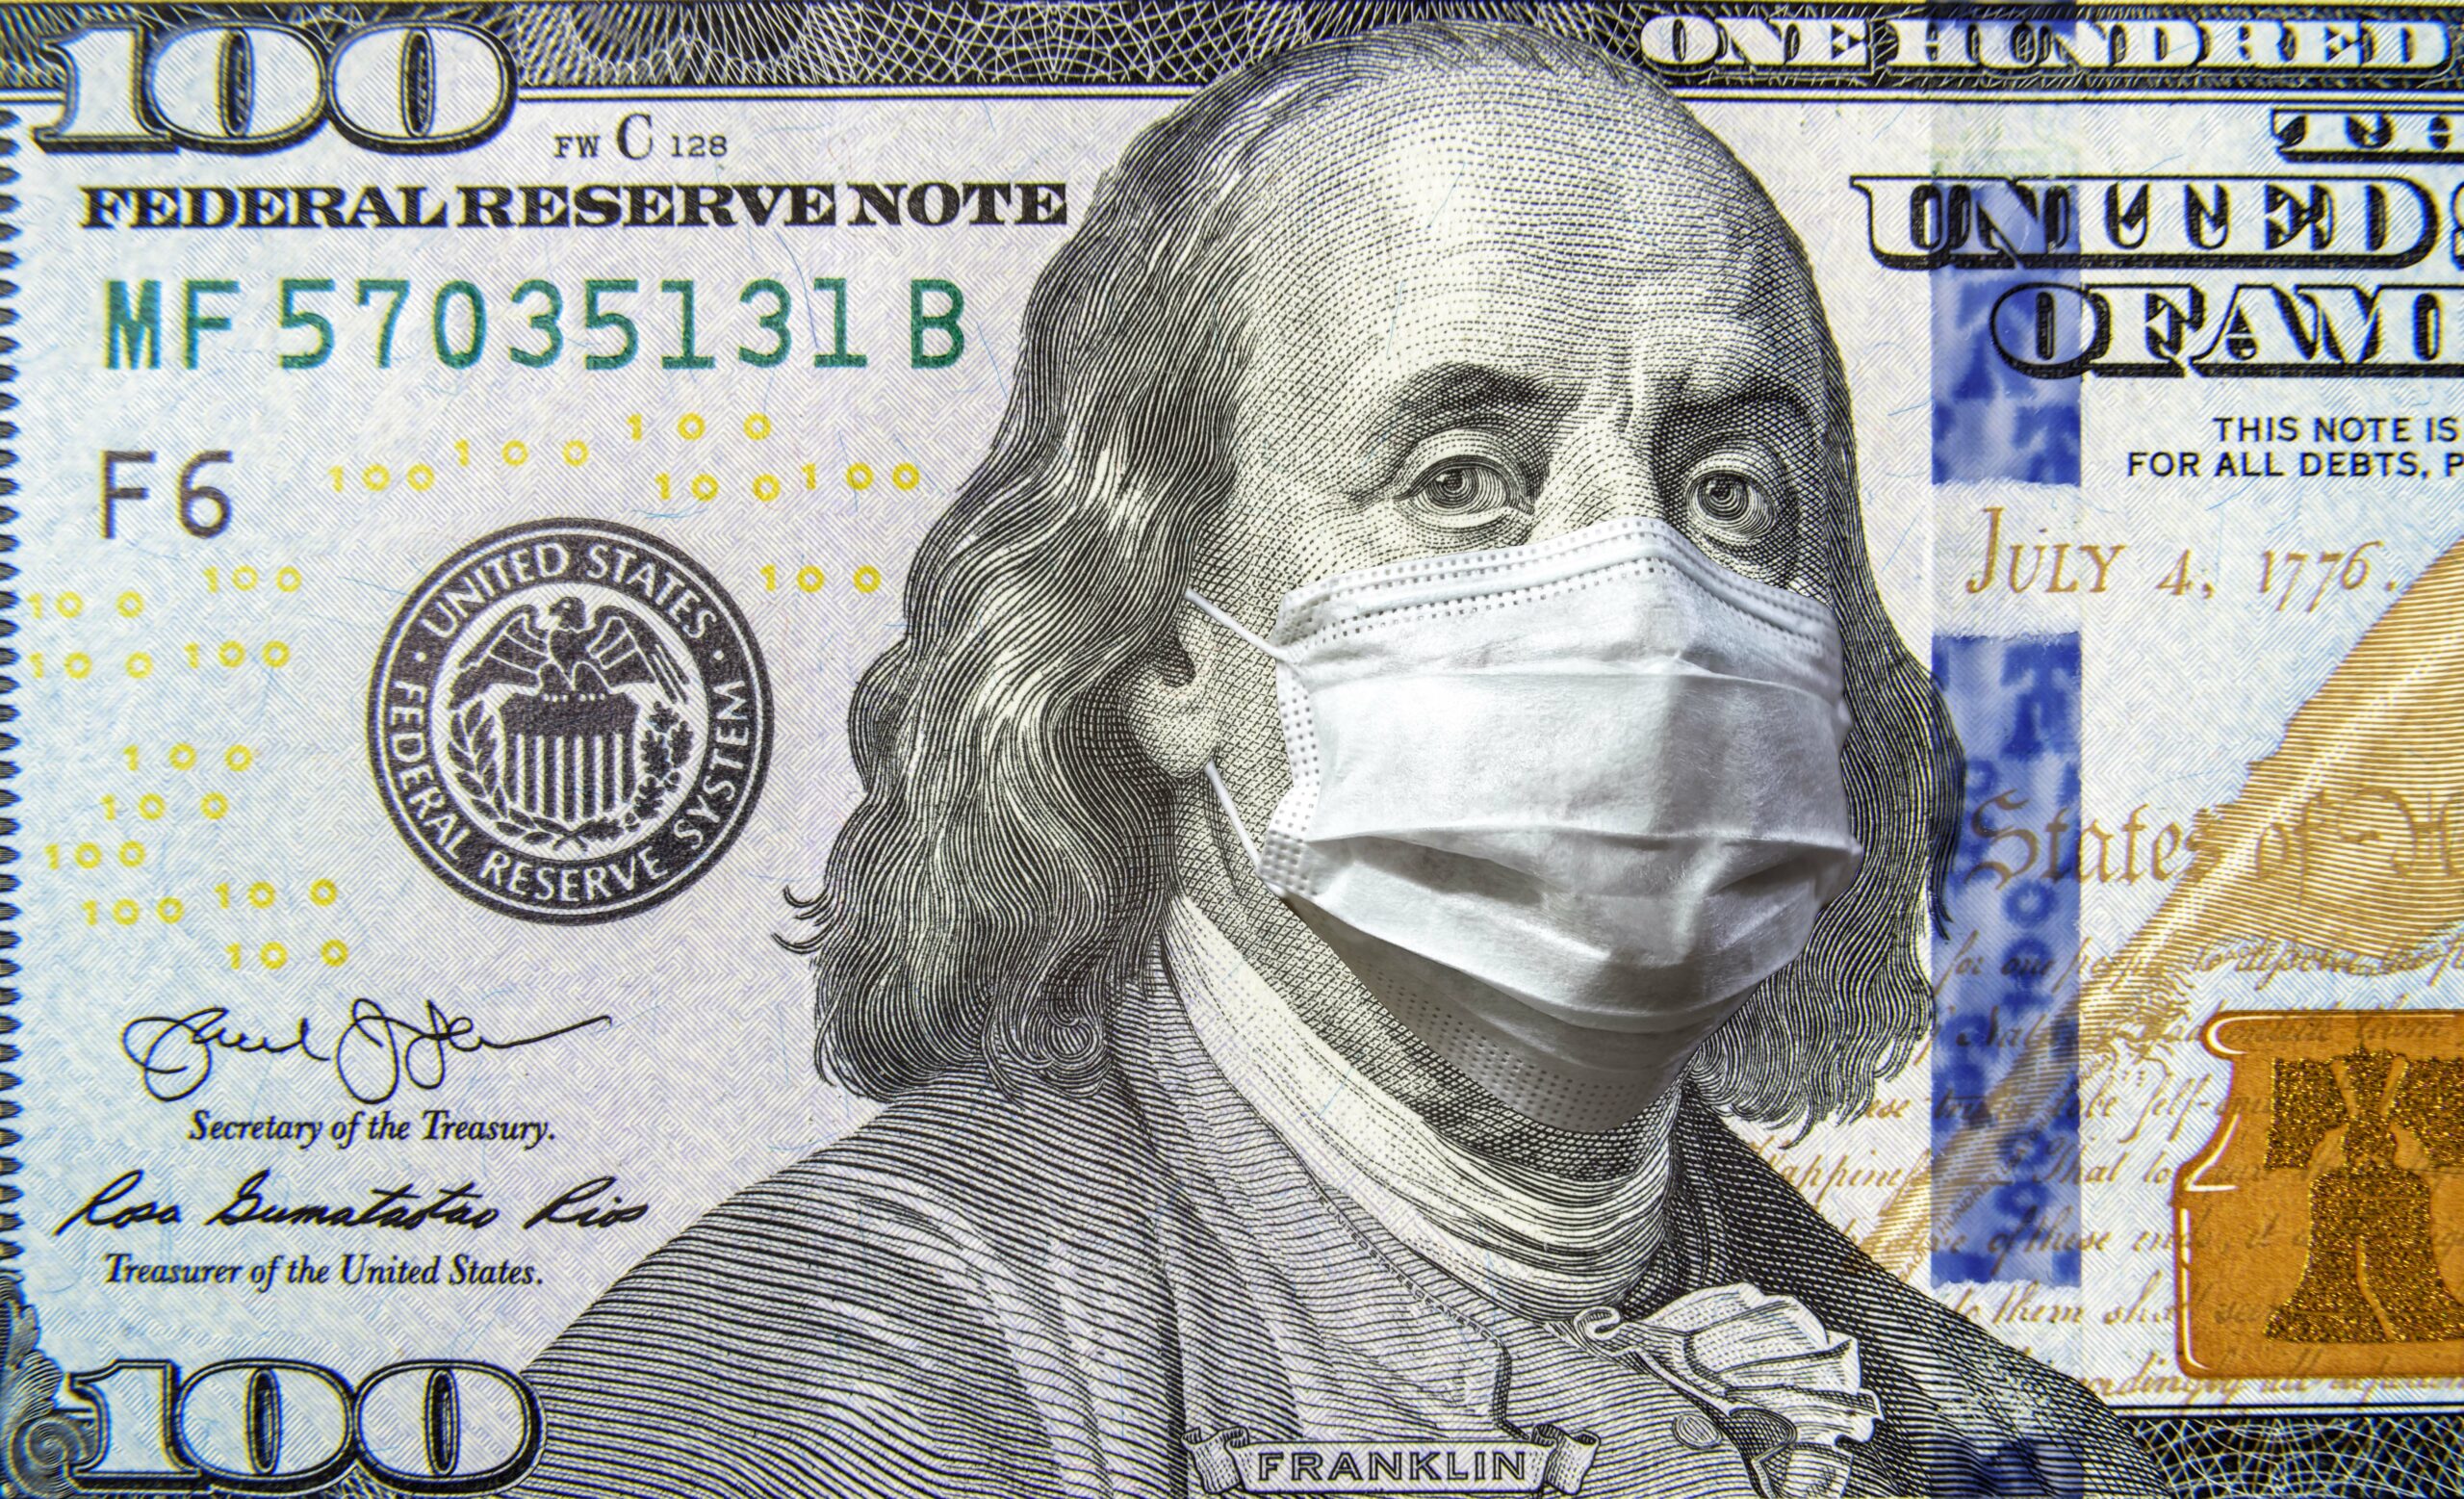 Benjamin Franklin on the $100 bill wearing a mask